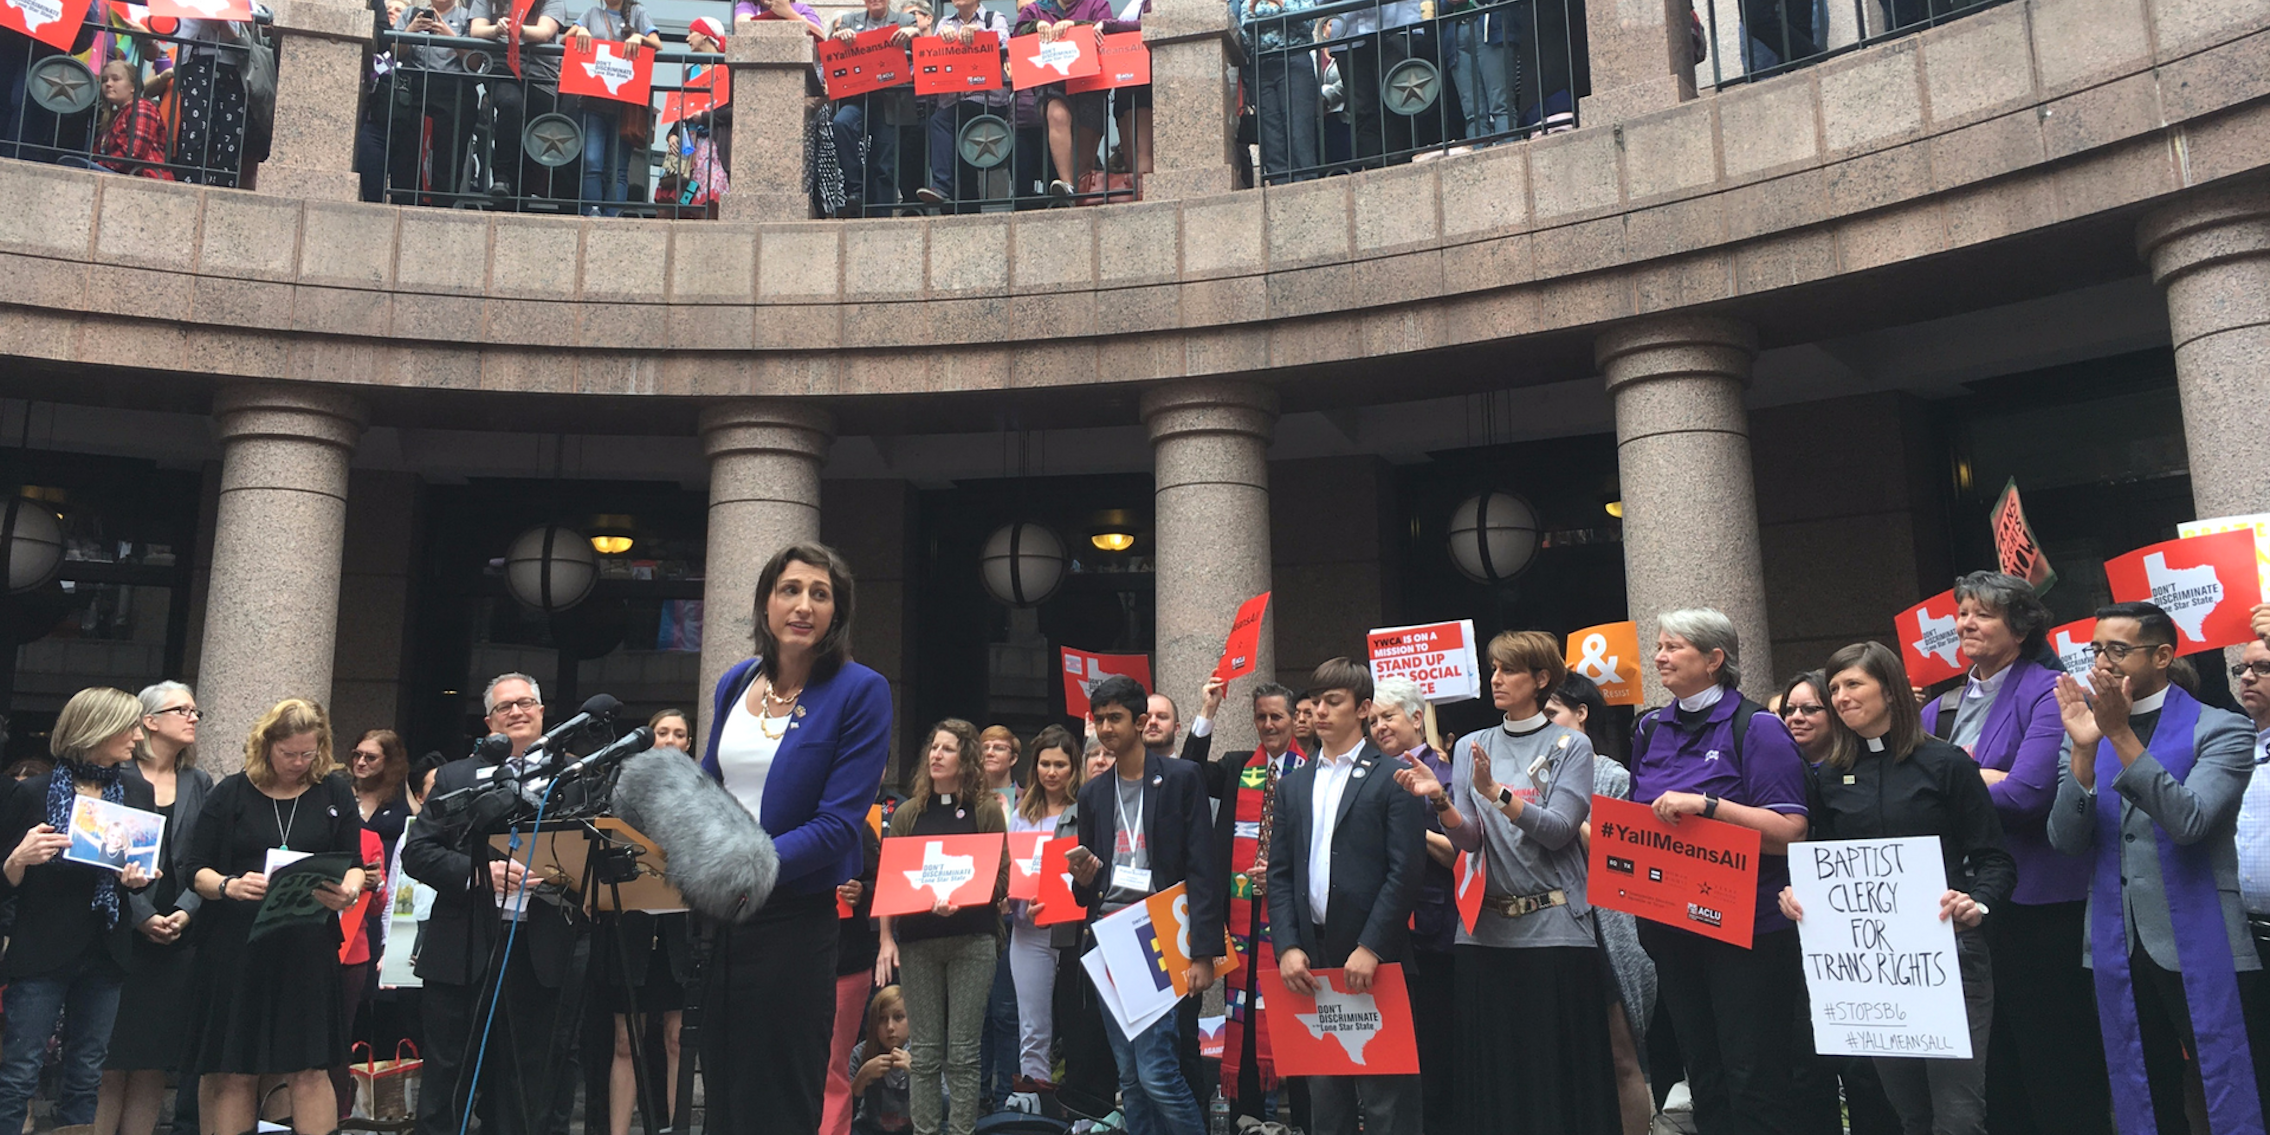 Danielle Skidmore, an engineer and transgender woman, speaks at a rally against the Texas bathroom bill SB6.